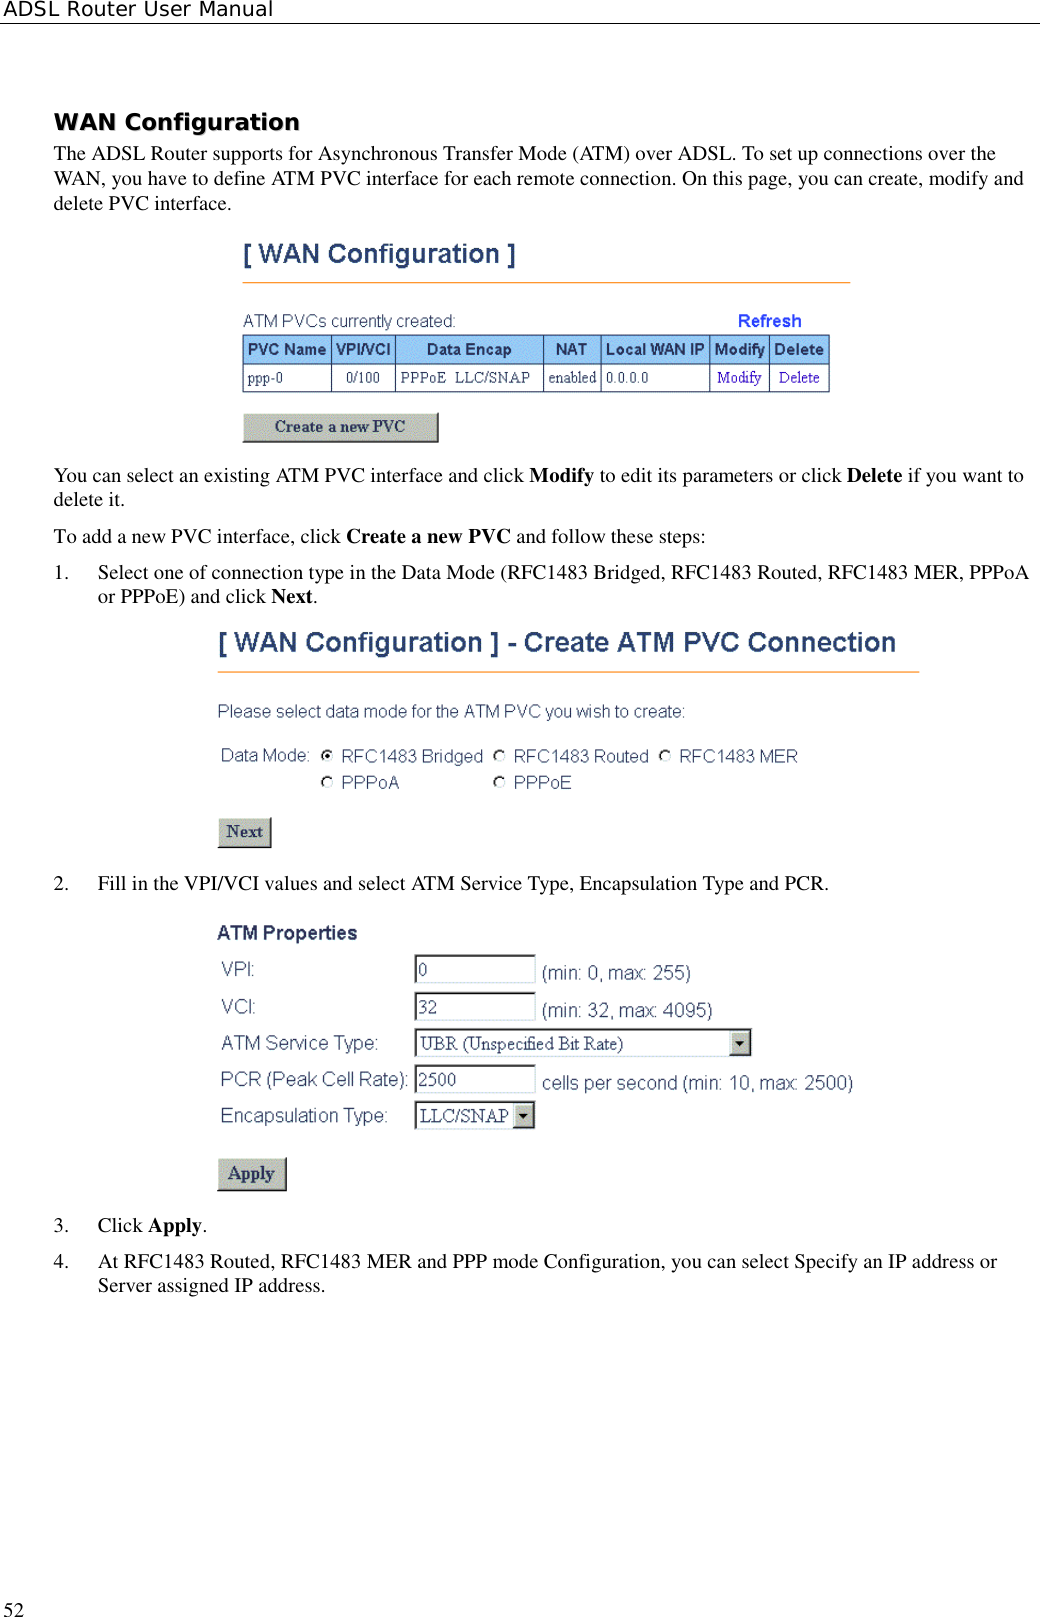 ADSL Router User Manual52WWAANN  CCoonnffiigguurraattiioonnThe ADSL Router supports for Asynchronous Transfer Mode (ATM) over ADSL. To set up connections over theWAN, you have to define ATM PVC interface for each remote connection. On this page, you can create, modify anddelete PVC interface.You can select an existing ATM PVC interface and click Modify to edit its parameters or click Delete if you want todelete it.To add a new PVC interface, click Create a new PVC and follow these steps:1. Select one of connection type in the Data Mode (RFC1483 Bridged, RFC1483 Routed, RFC1483 MER, PPPoAor PPPoE) and click Next.2. Fill in the VPI/VCI values and select ATM Service Type, Encapsulation Type and PCR.3. Click Apply.4. At RFC1483 Routed, RFC1483 MER and PPP mode Configuration, you can select Specify an IP address orServer assigned IP address.